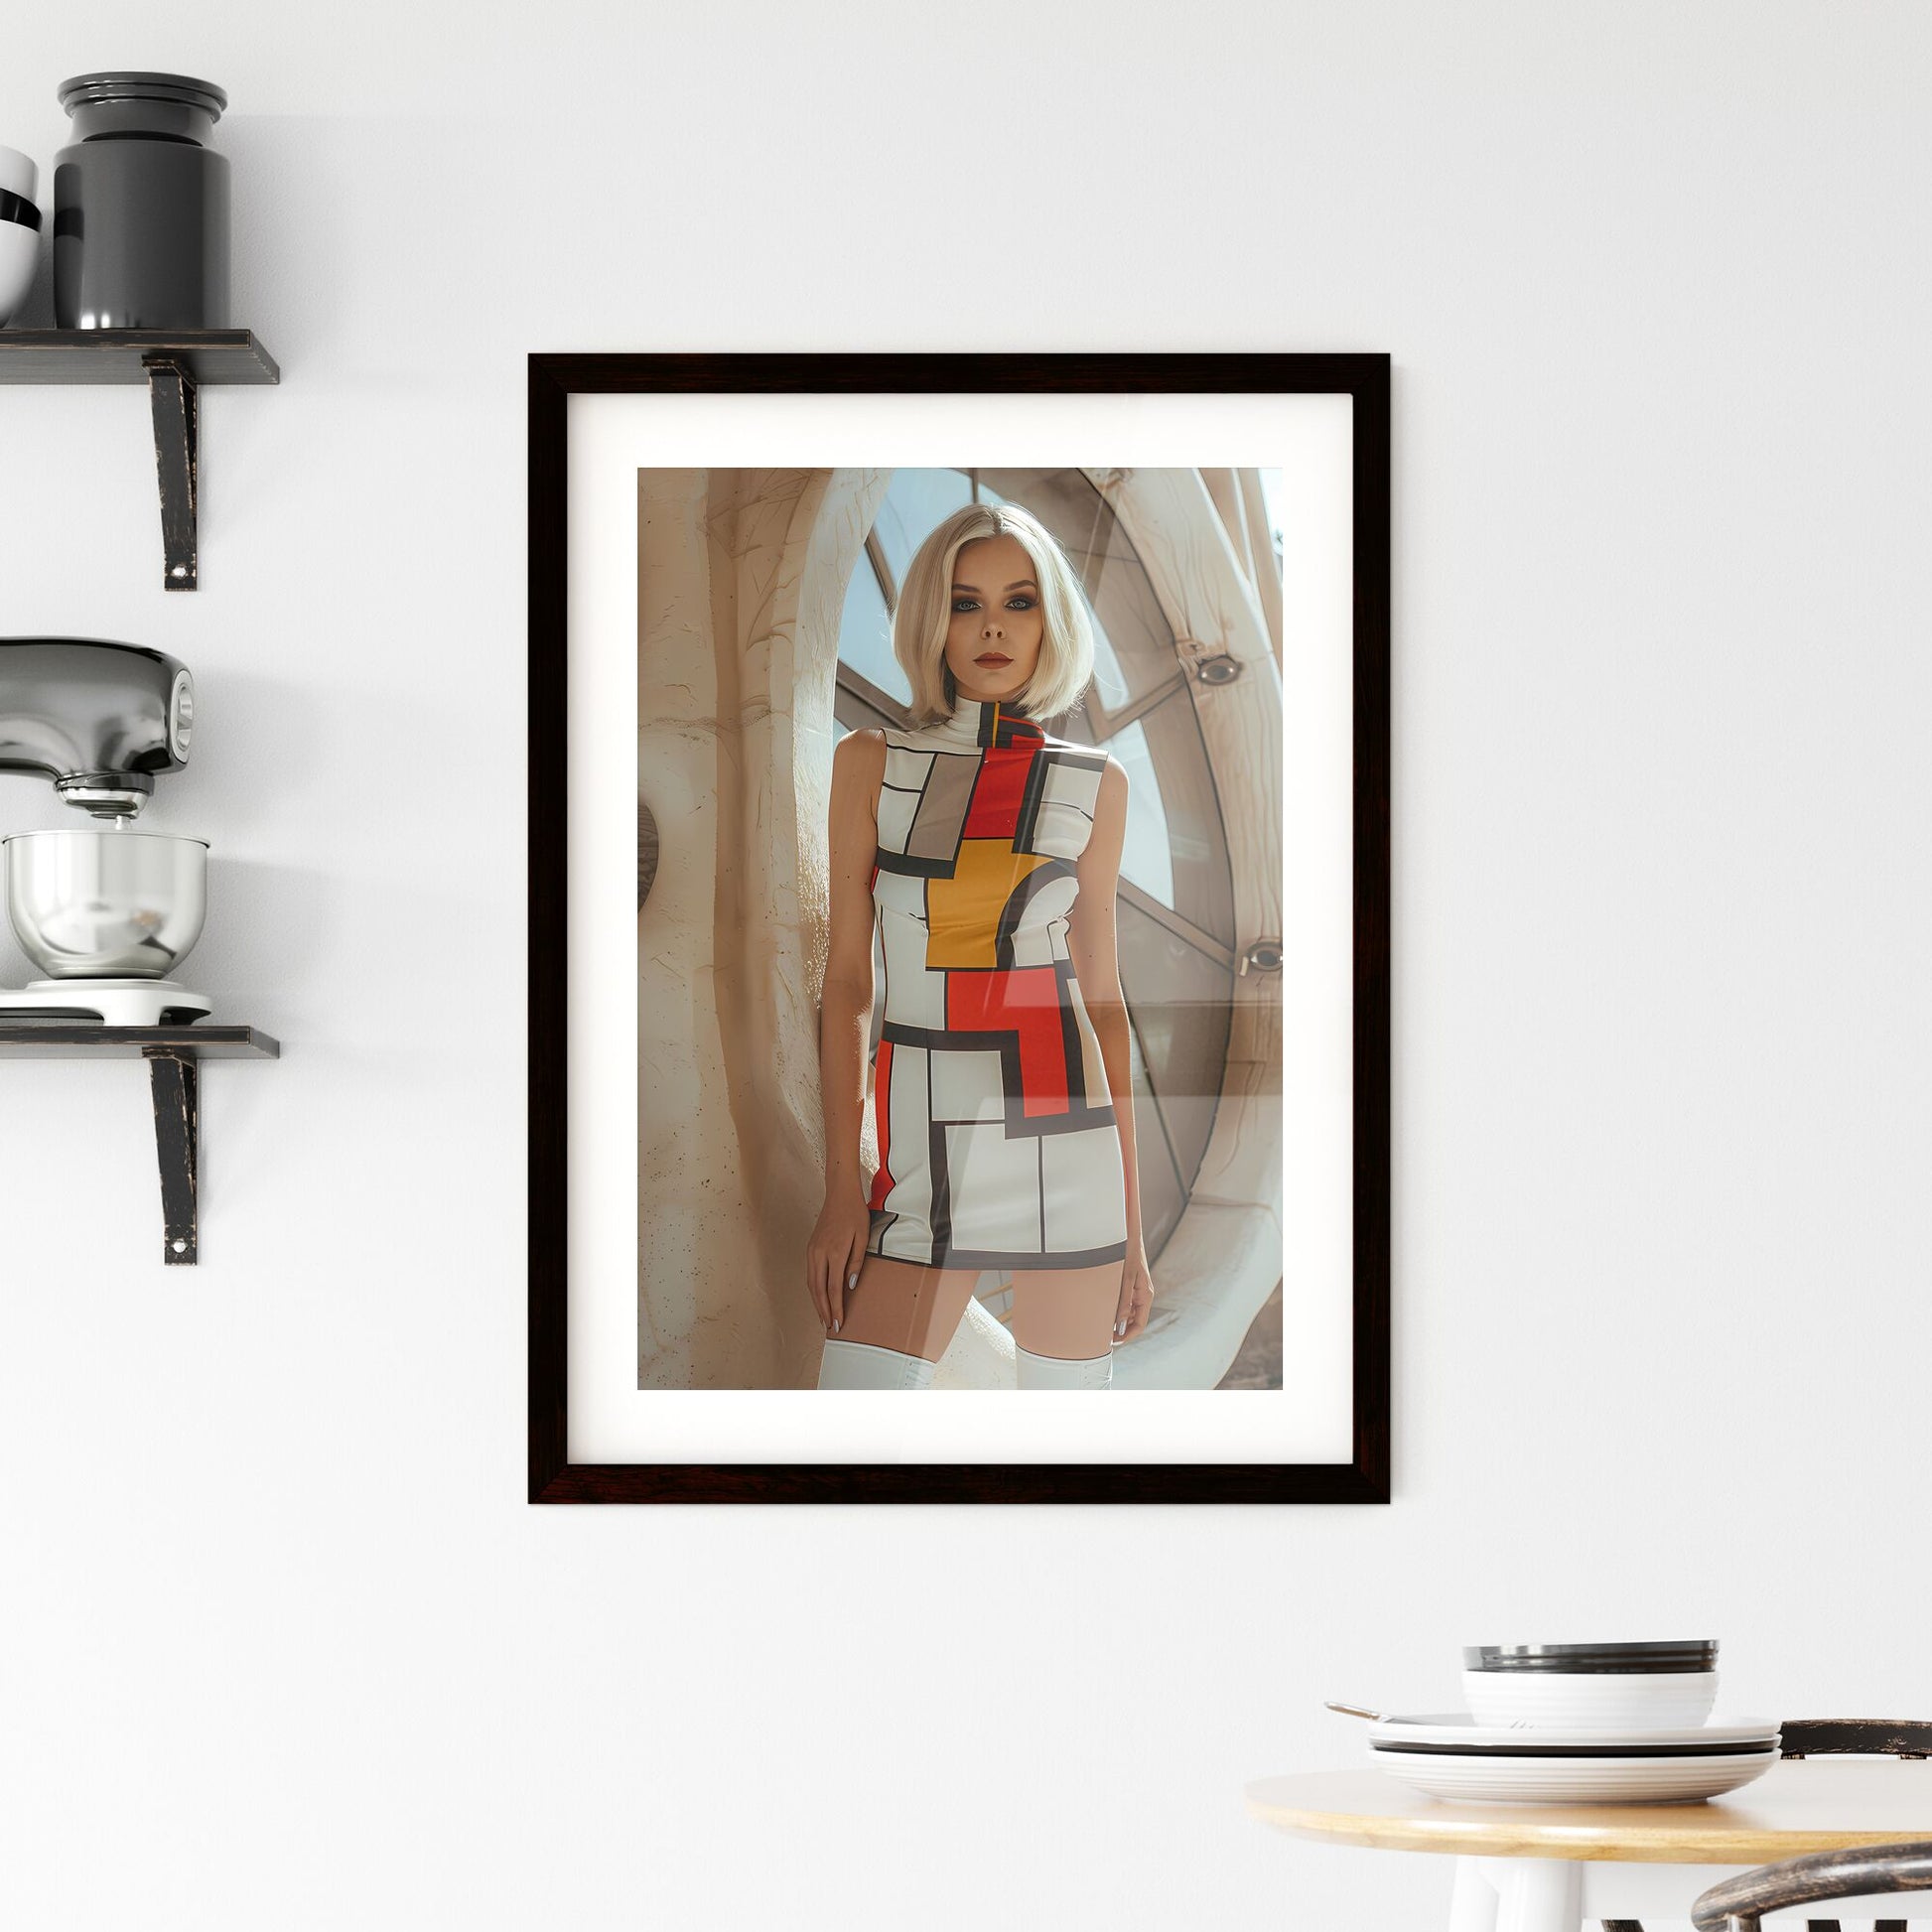 Retro Futuristic 60s Woman in Vibrant Dress Painting with Ultra Minimalist House Design Default Title